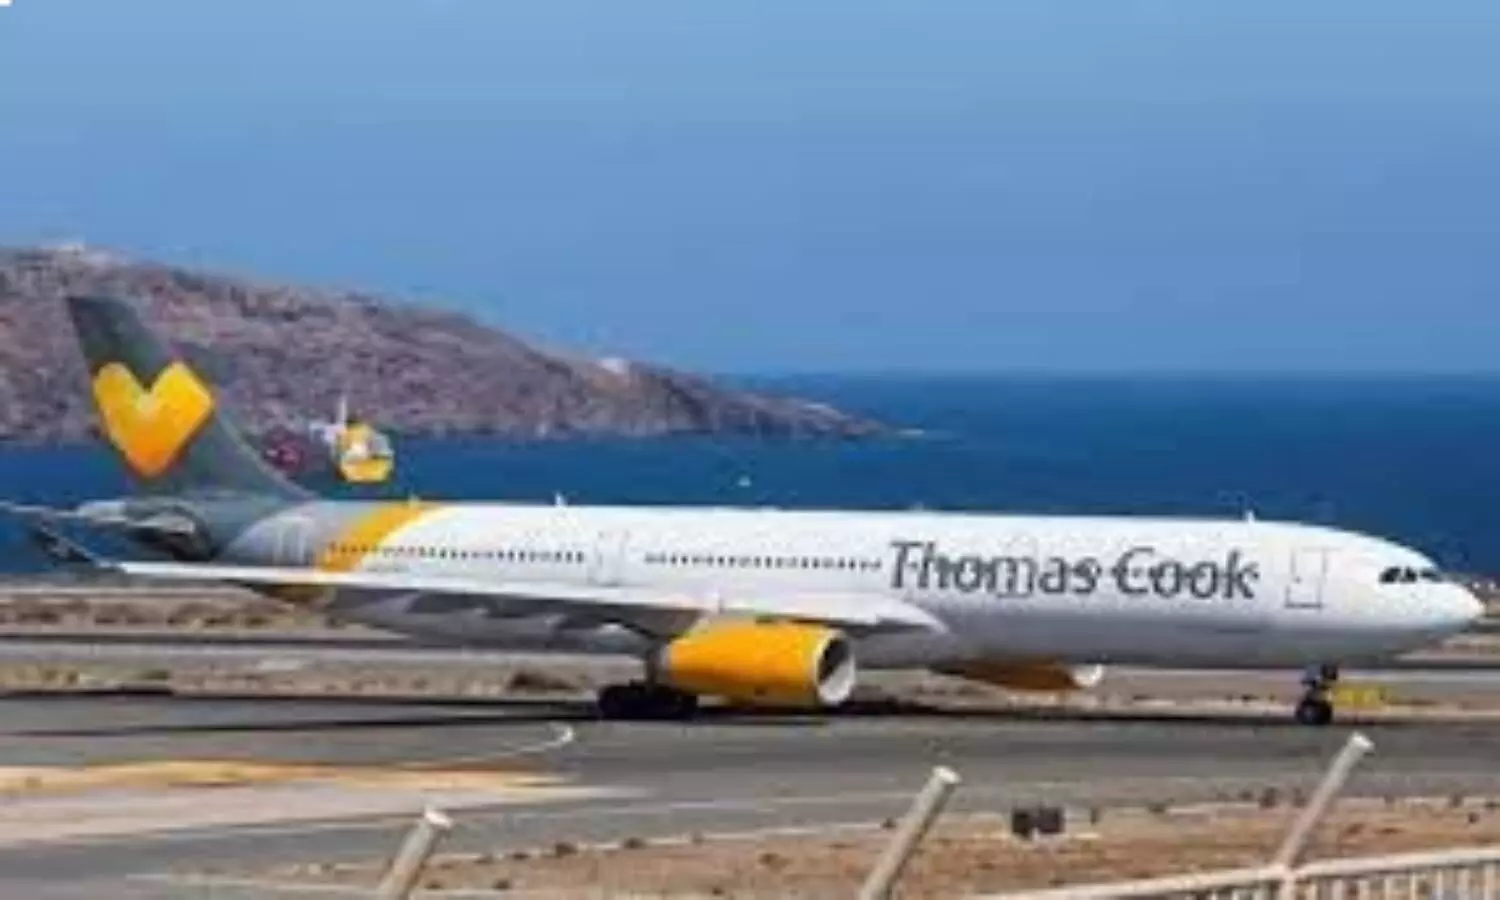 Significant travel intent for Q4 2021: Thomas Cook survey